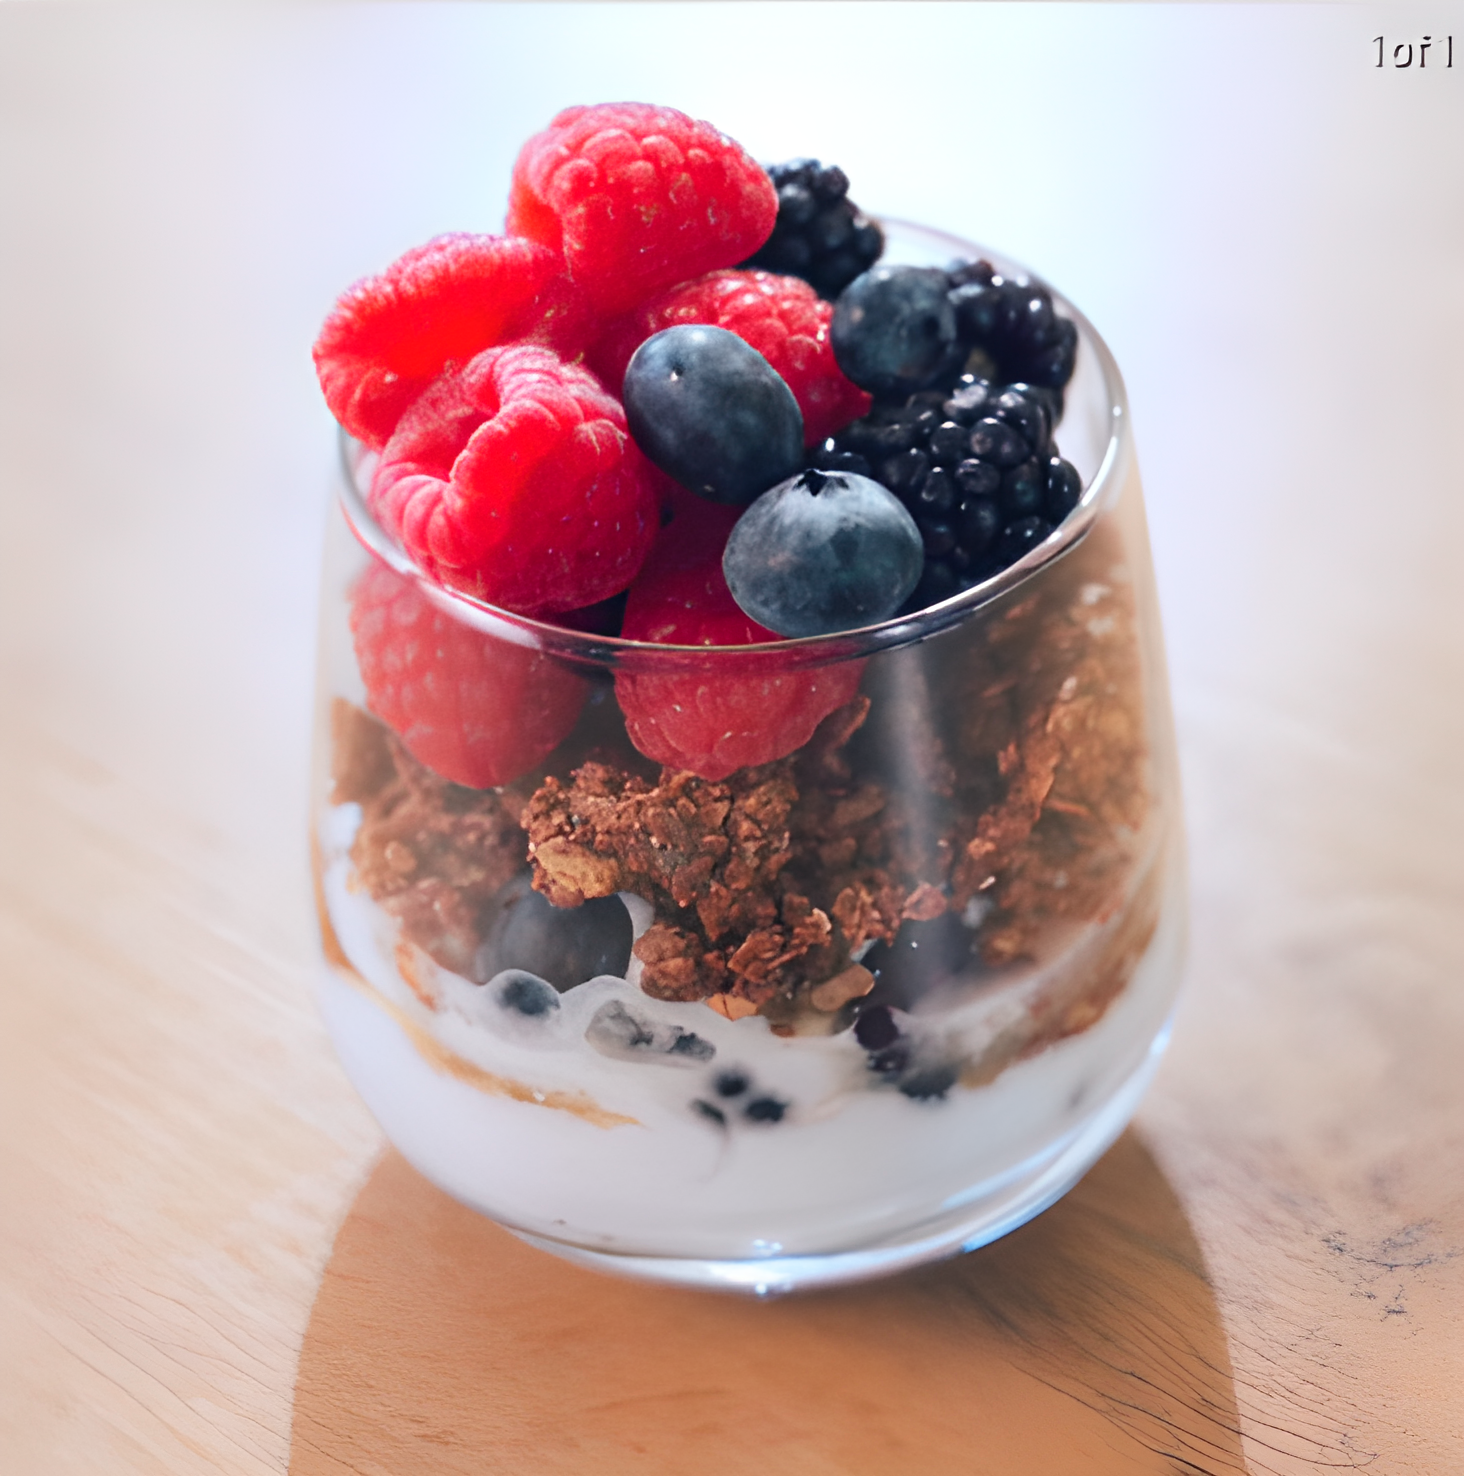 Buy Coconut Yogurt Parfait from Mylk Ma`am available online at VEND. Explore more Healthy Food now.